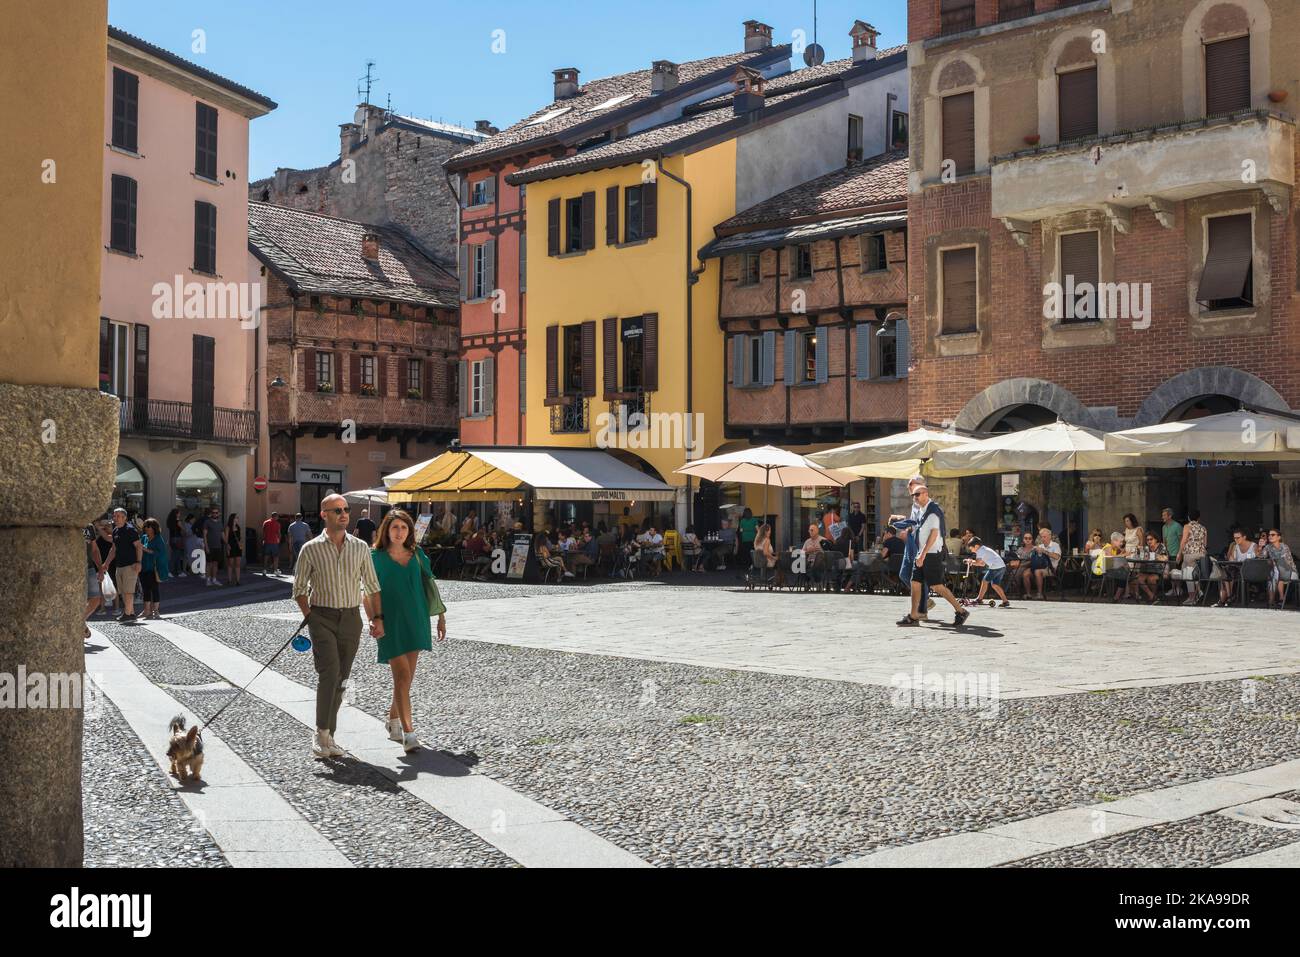 Italy piazza, view in summer of scenic cafes and bars in the Piazza San Fedele in the historic center of the city of Como, Lombardy, Italy Stock Photo